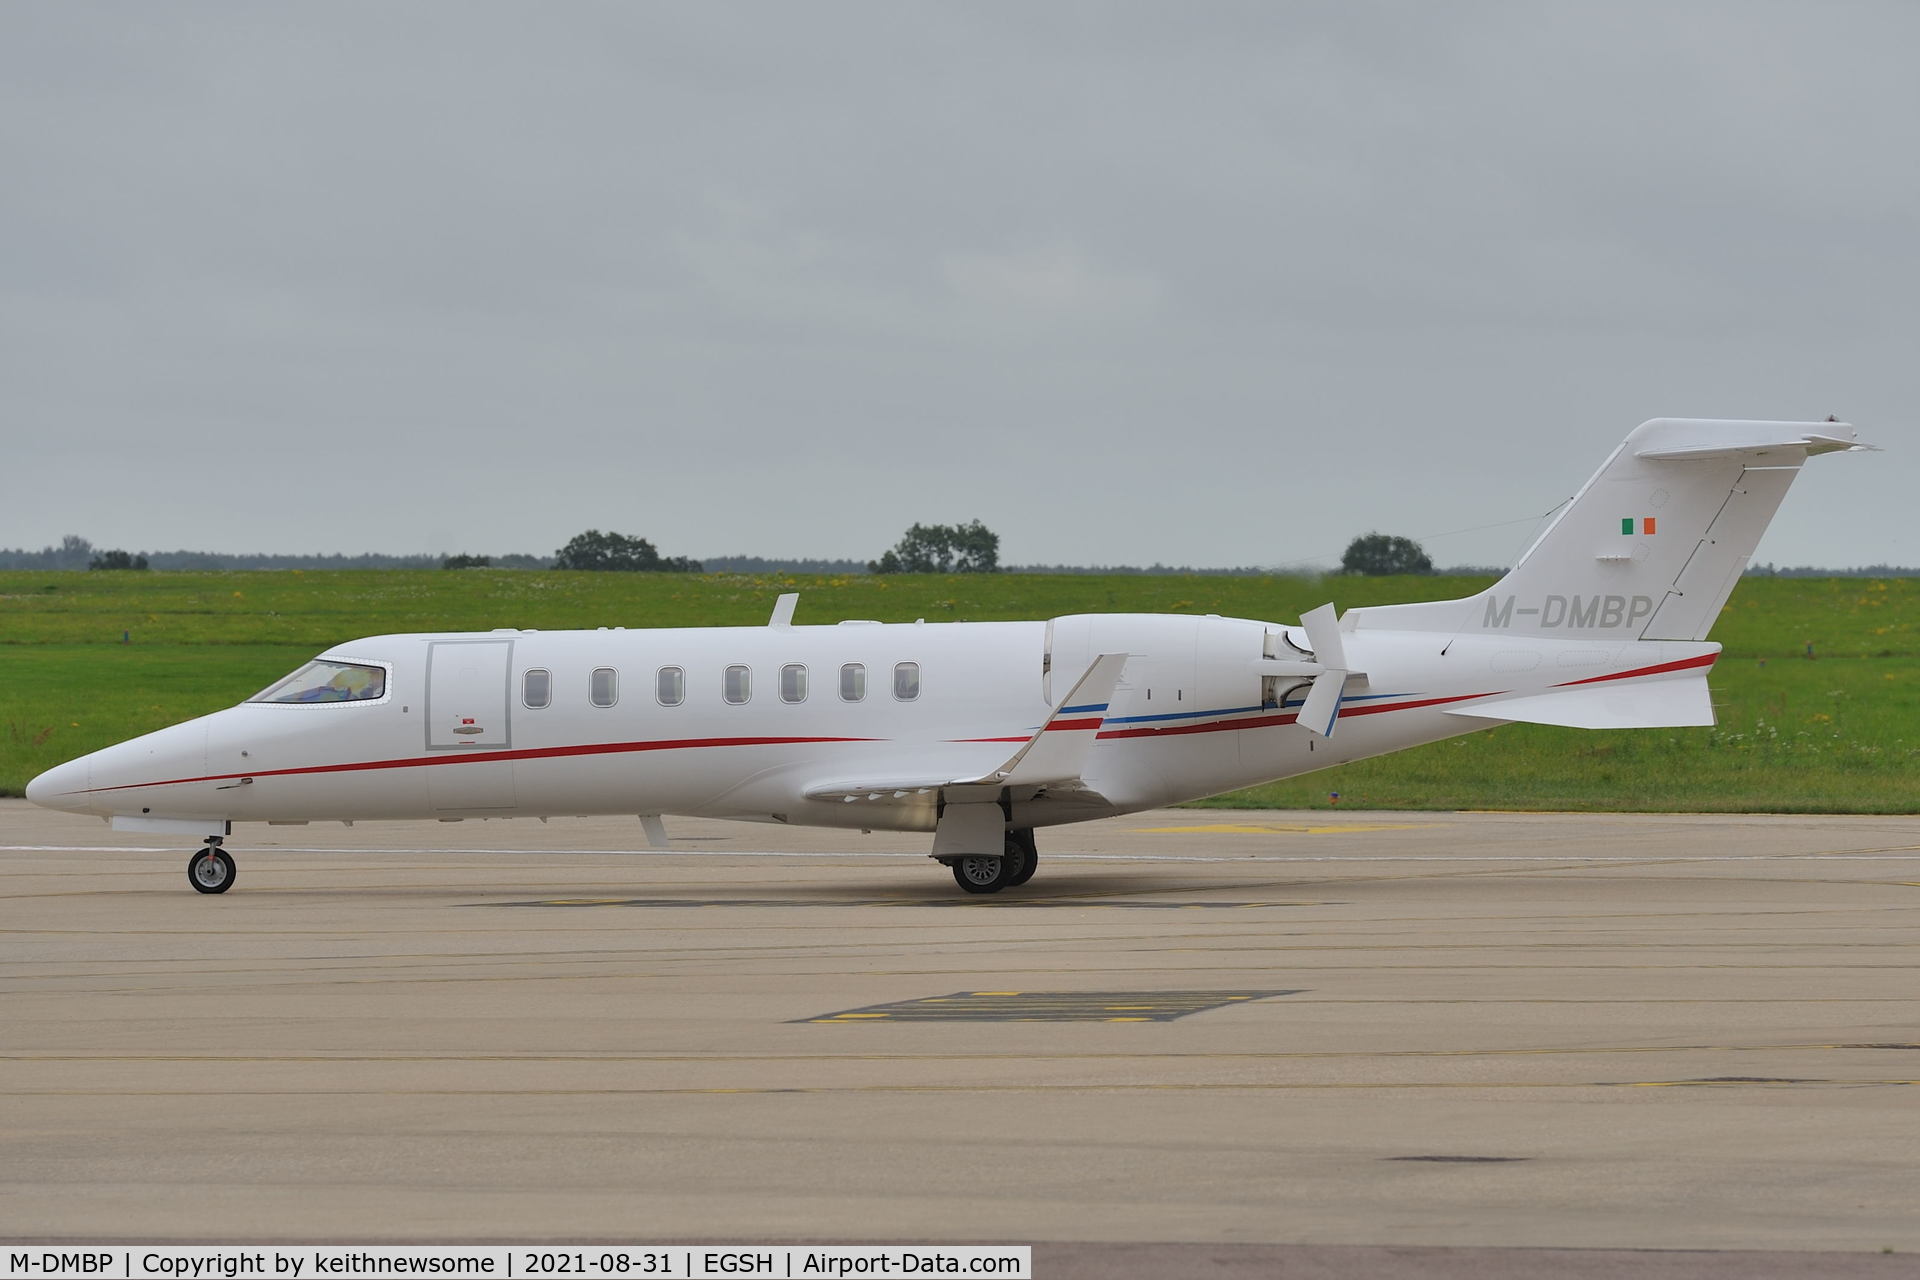 M-DMBP, 2012 Learjet 40 C/N 45-2133, Arriving at Norwich with later colour scheme.